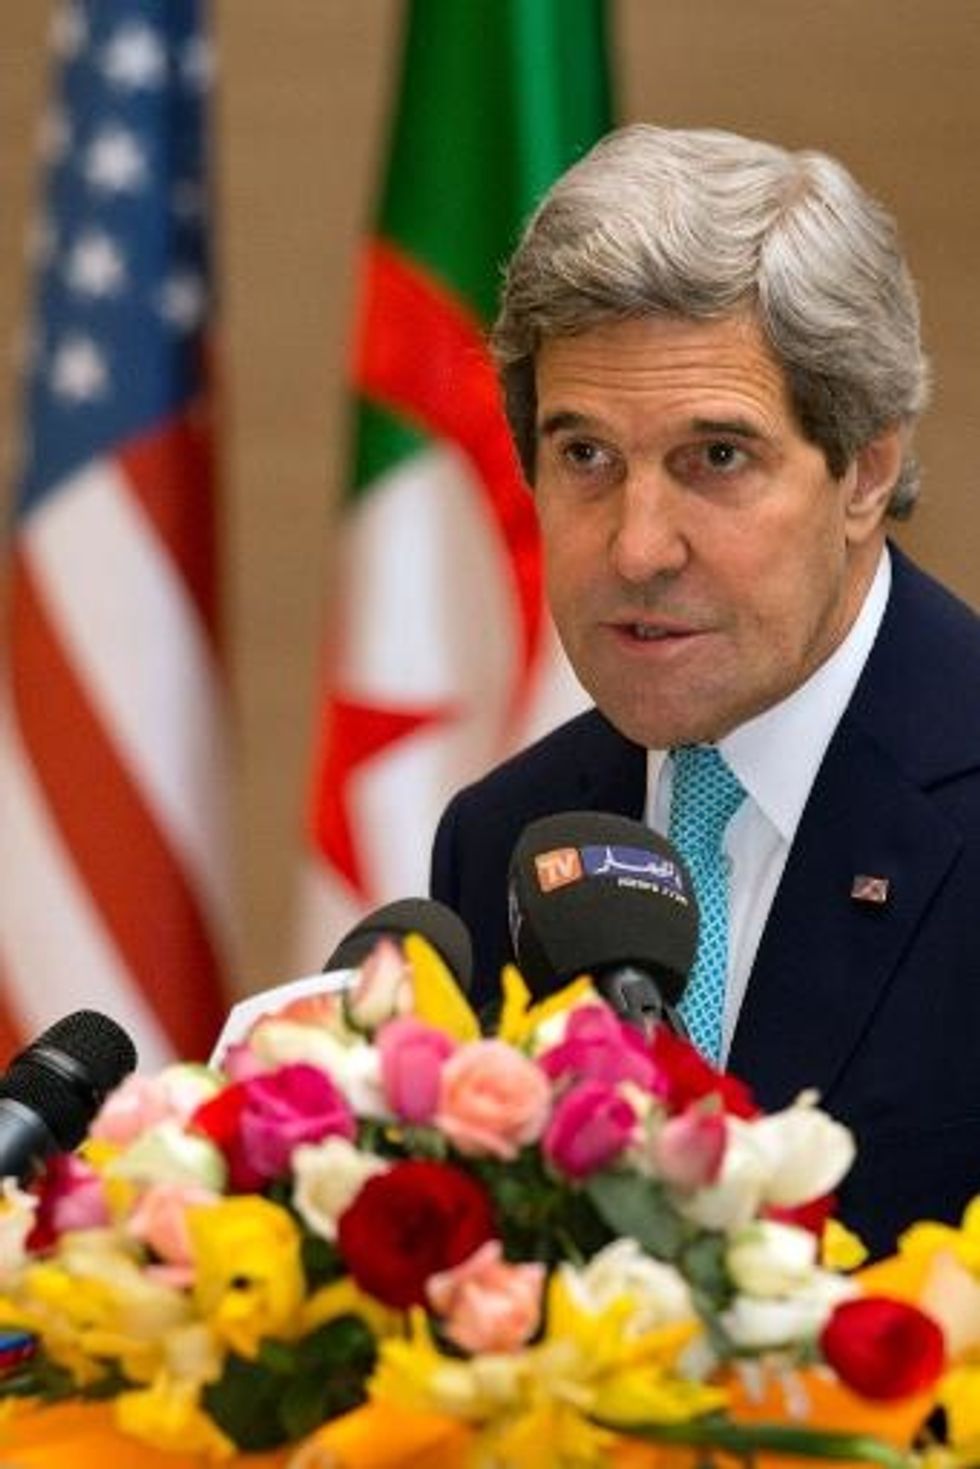 Frustrated Kerry Urges Leadership From Israel PM, Abbas